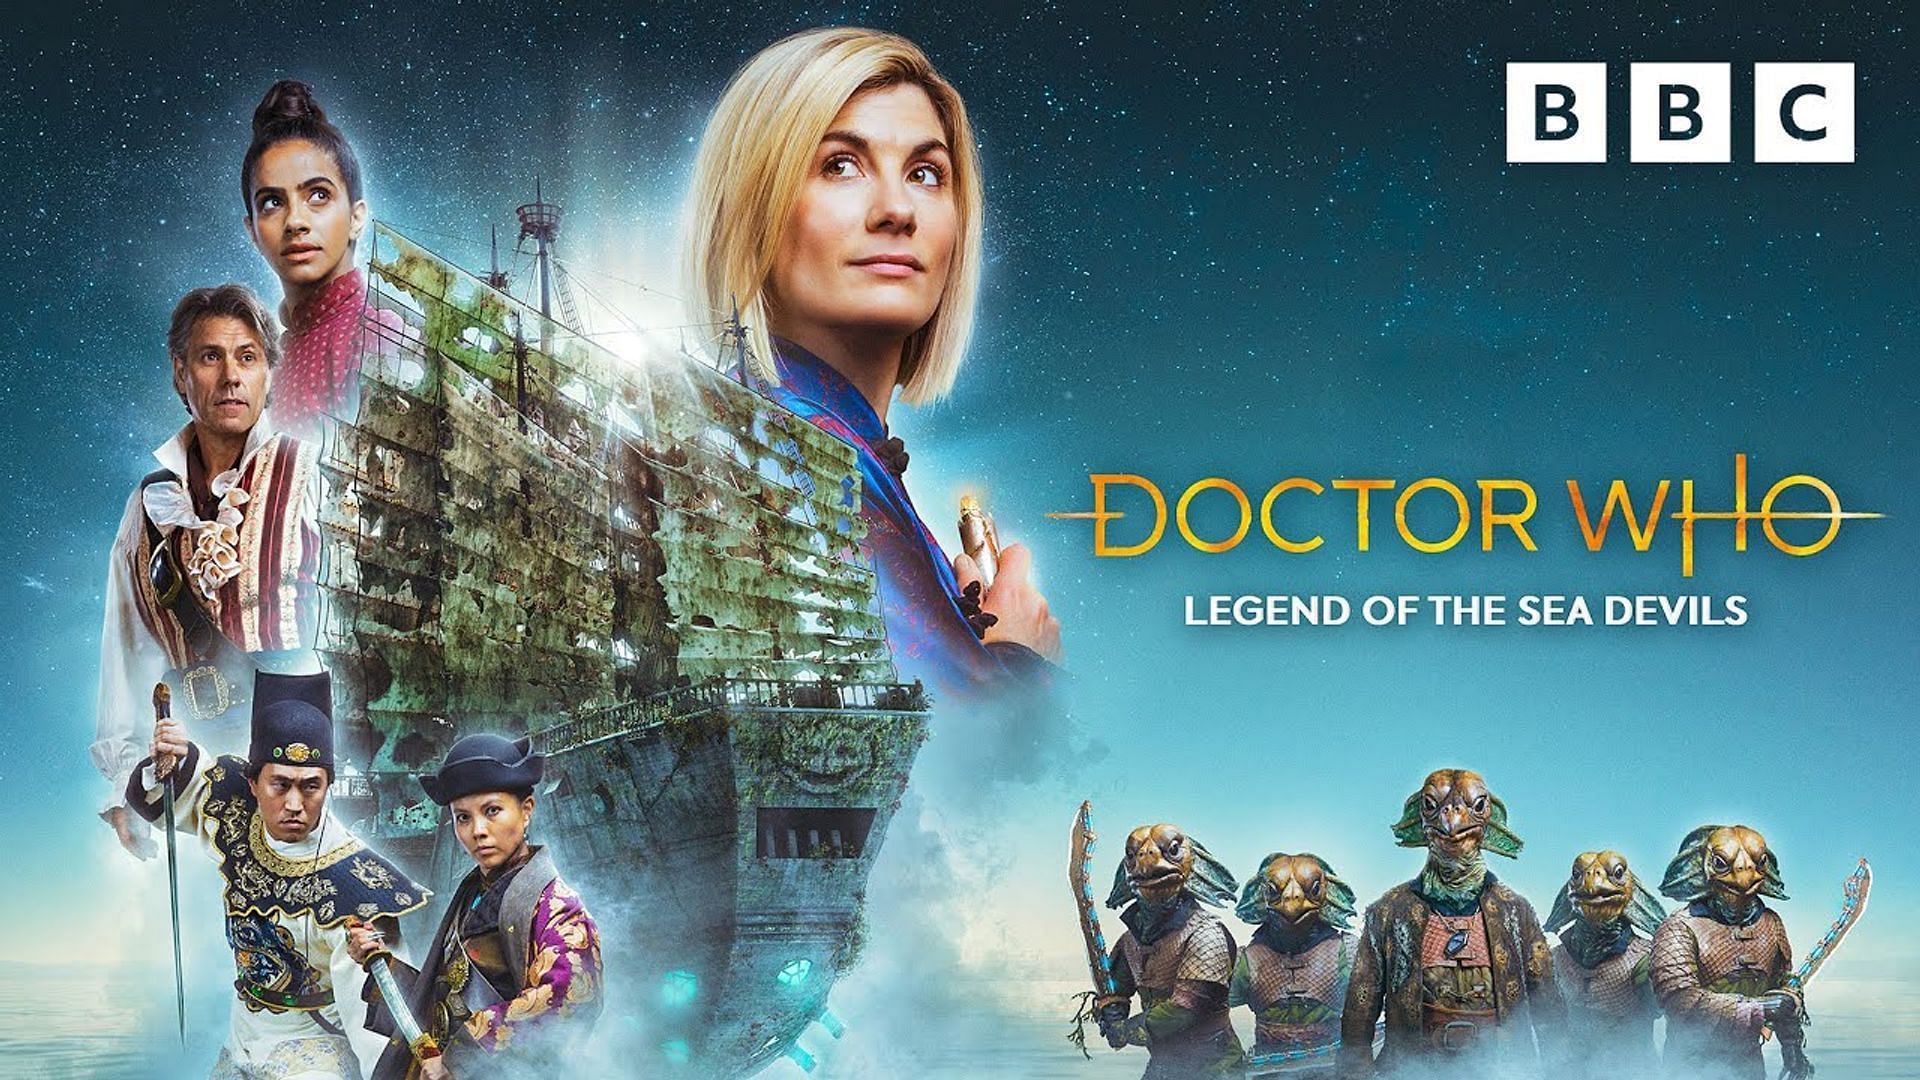 BBC&#039;s official poster for Doctor Who: Legend of the Sea Devils (Image via BBC)